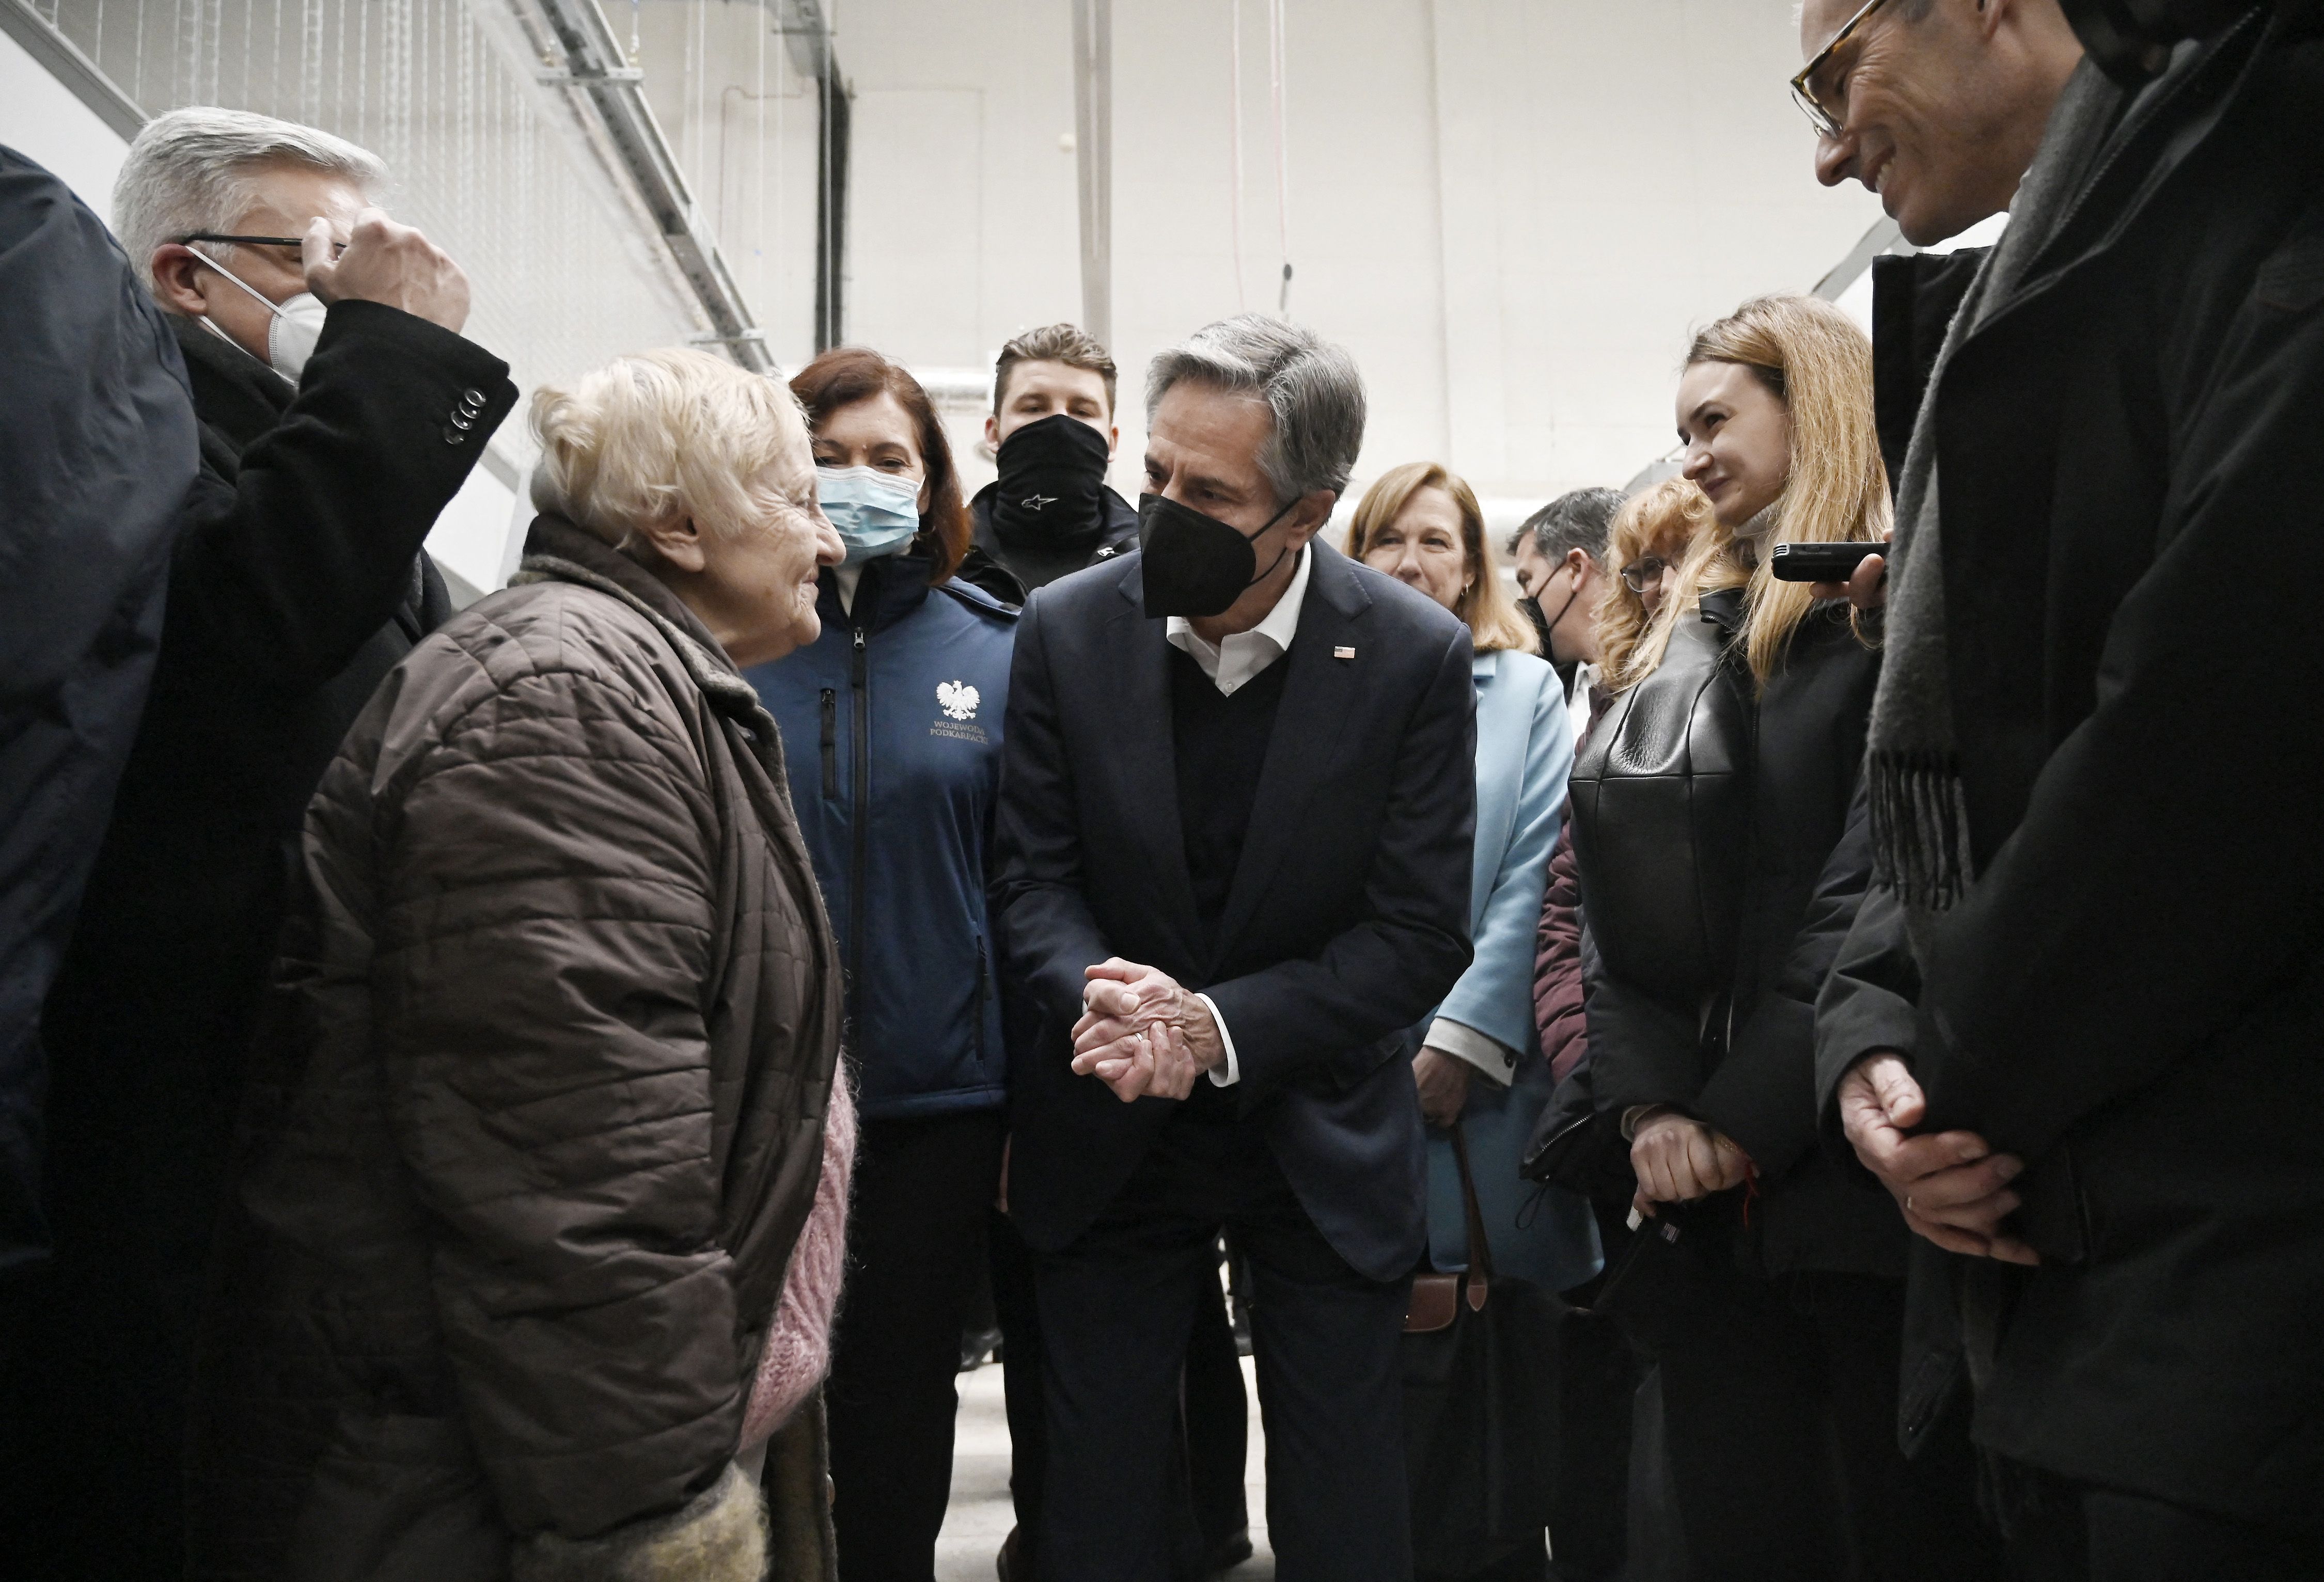 Secretary of State Antony Blinken (C) meets with refugees at a refugee reception center at the Ukrainian-Polish border crossing in Korczowa on March 5, 2022 